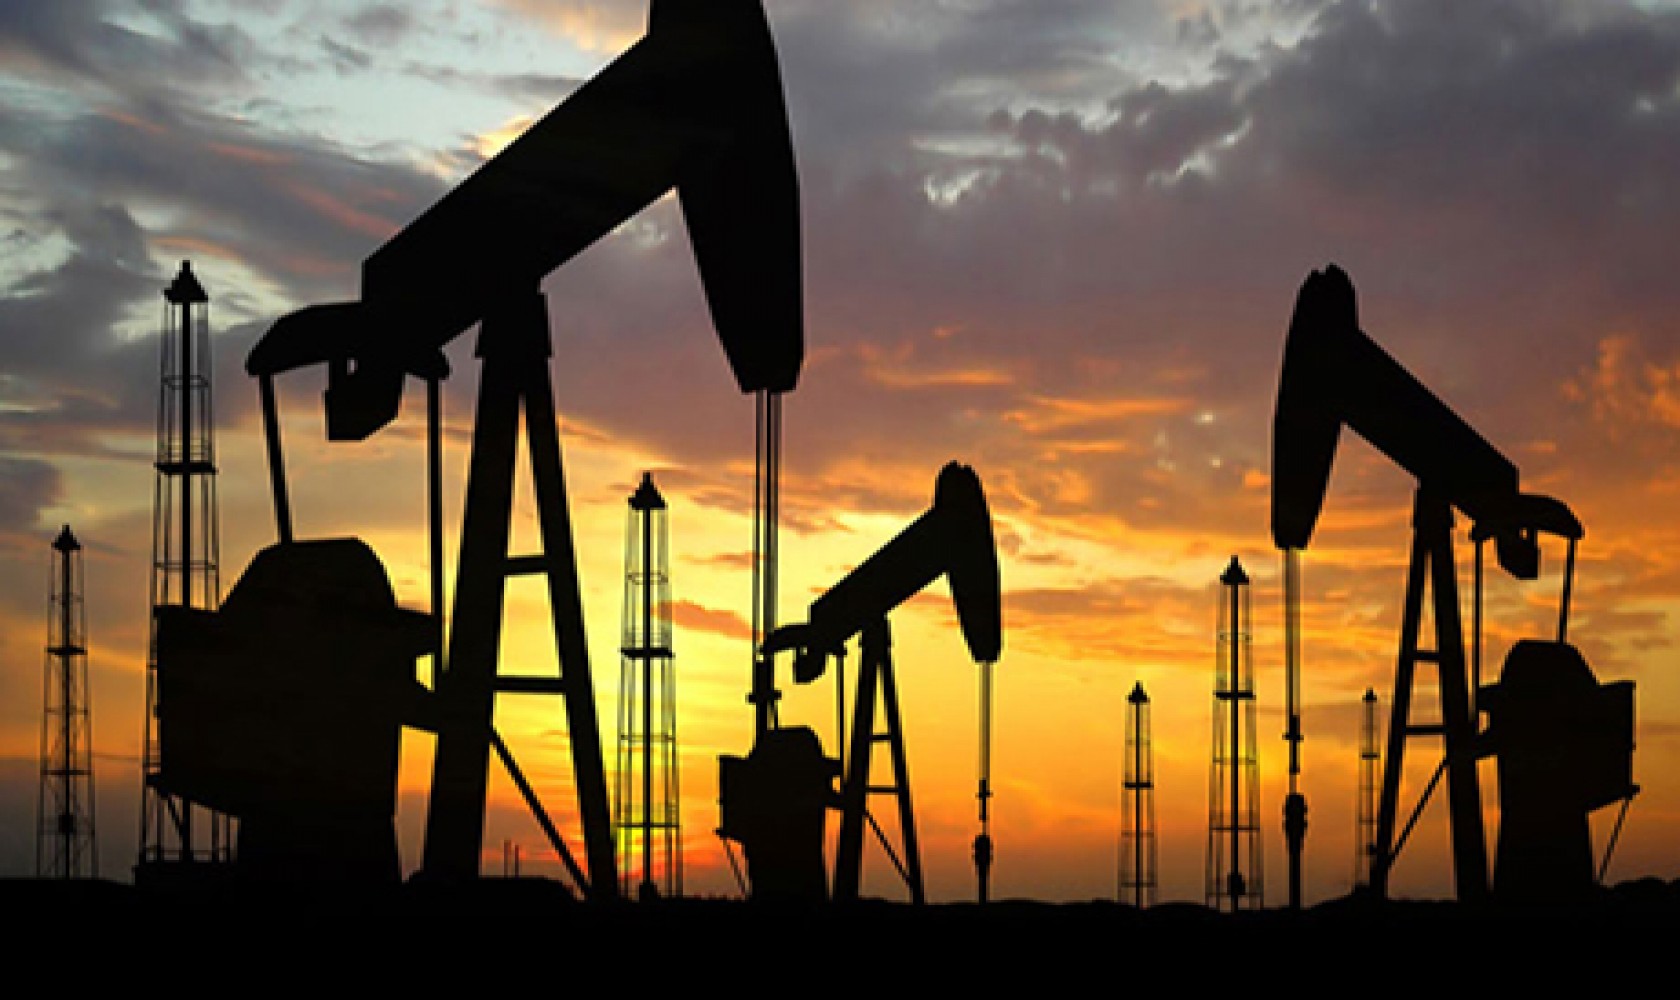 Petroleum engineers design and develop methods for extracting oil and gas from deposits below the earth’s surface.